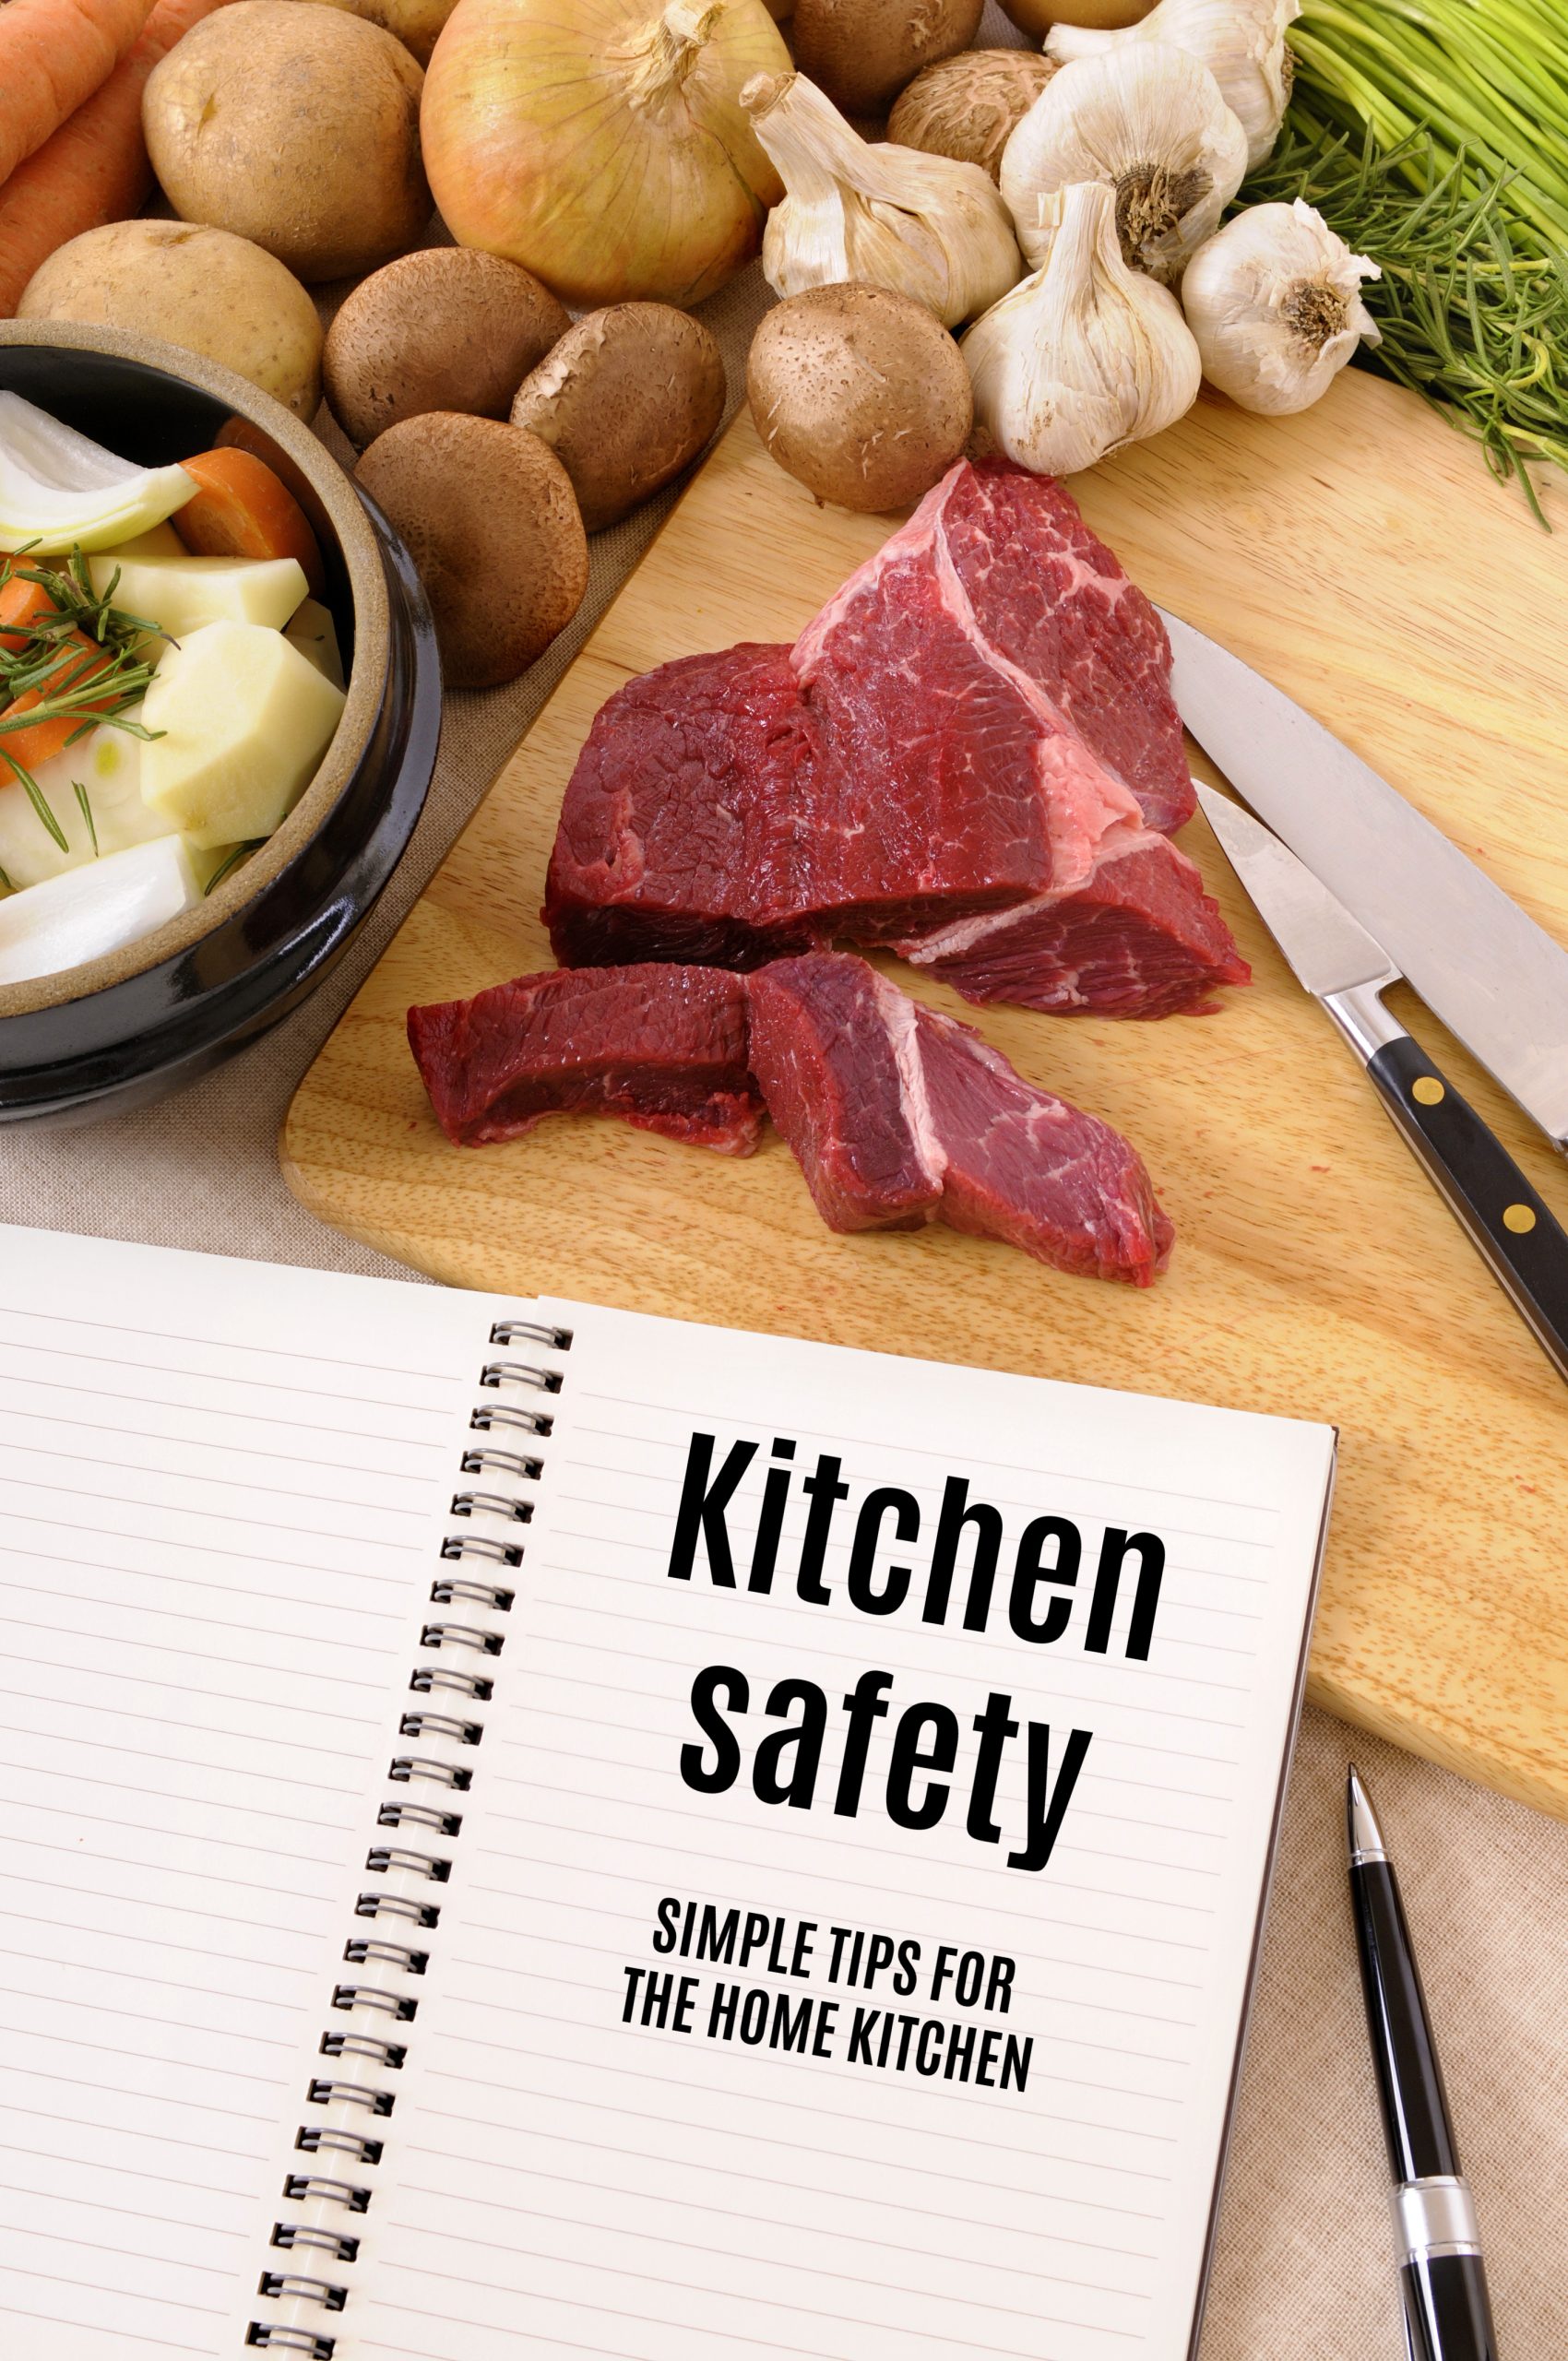 Kitchen safety smart tips for the home.